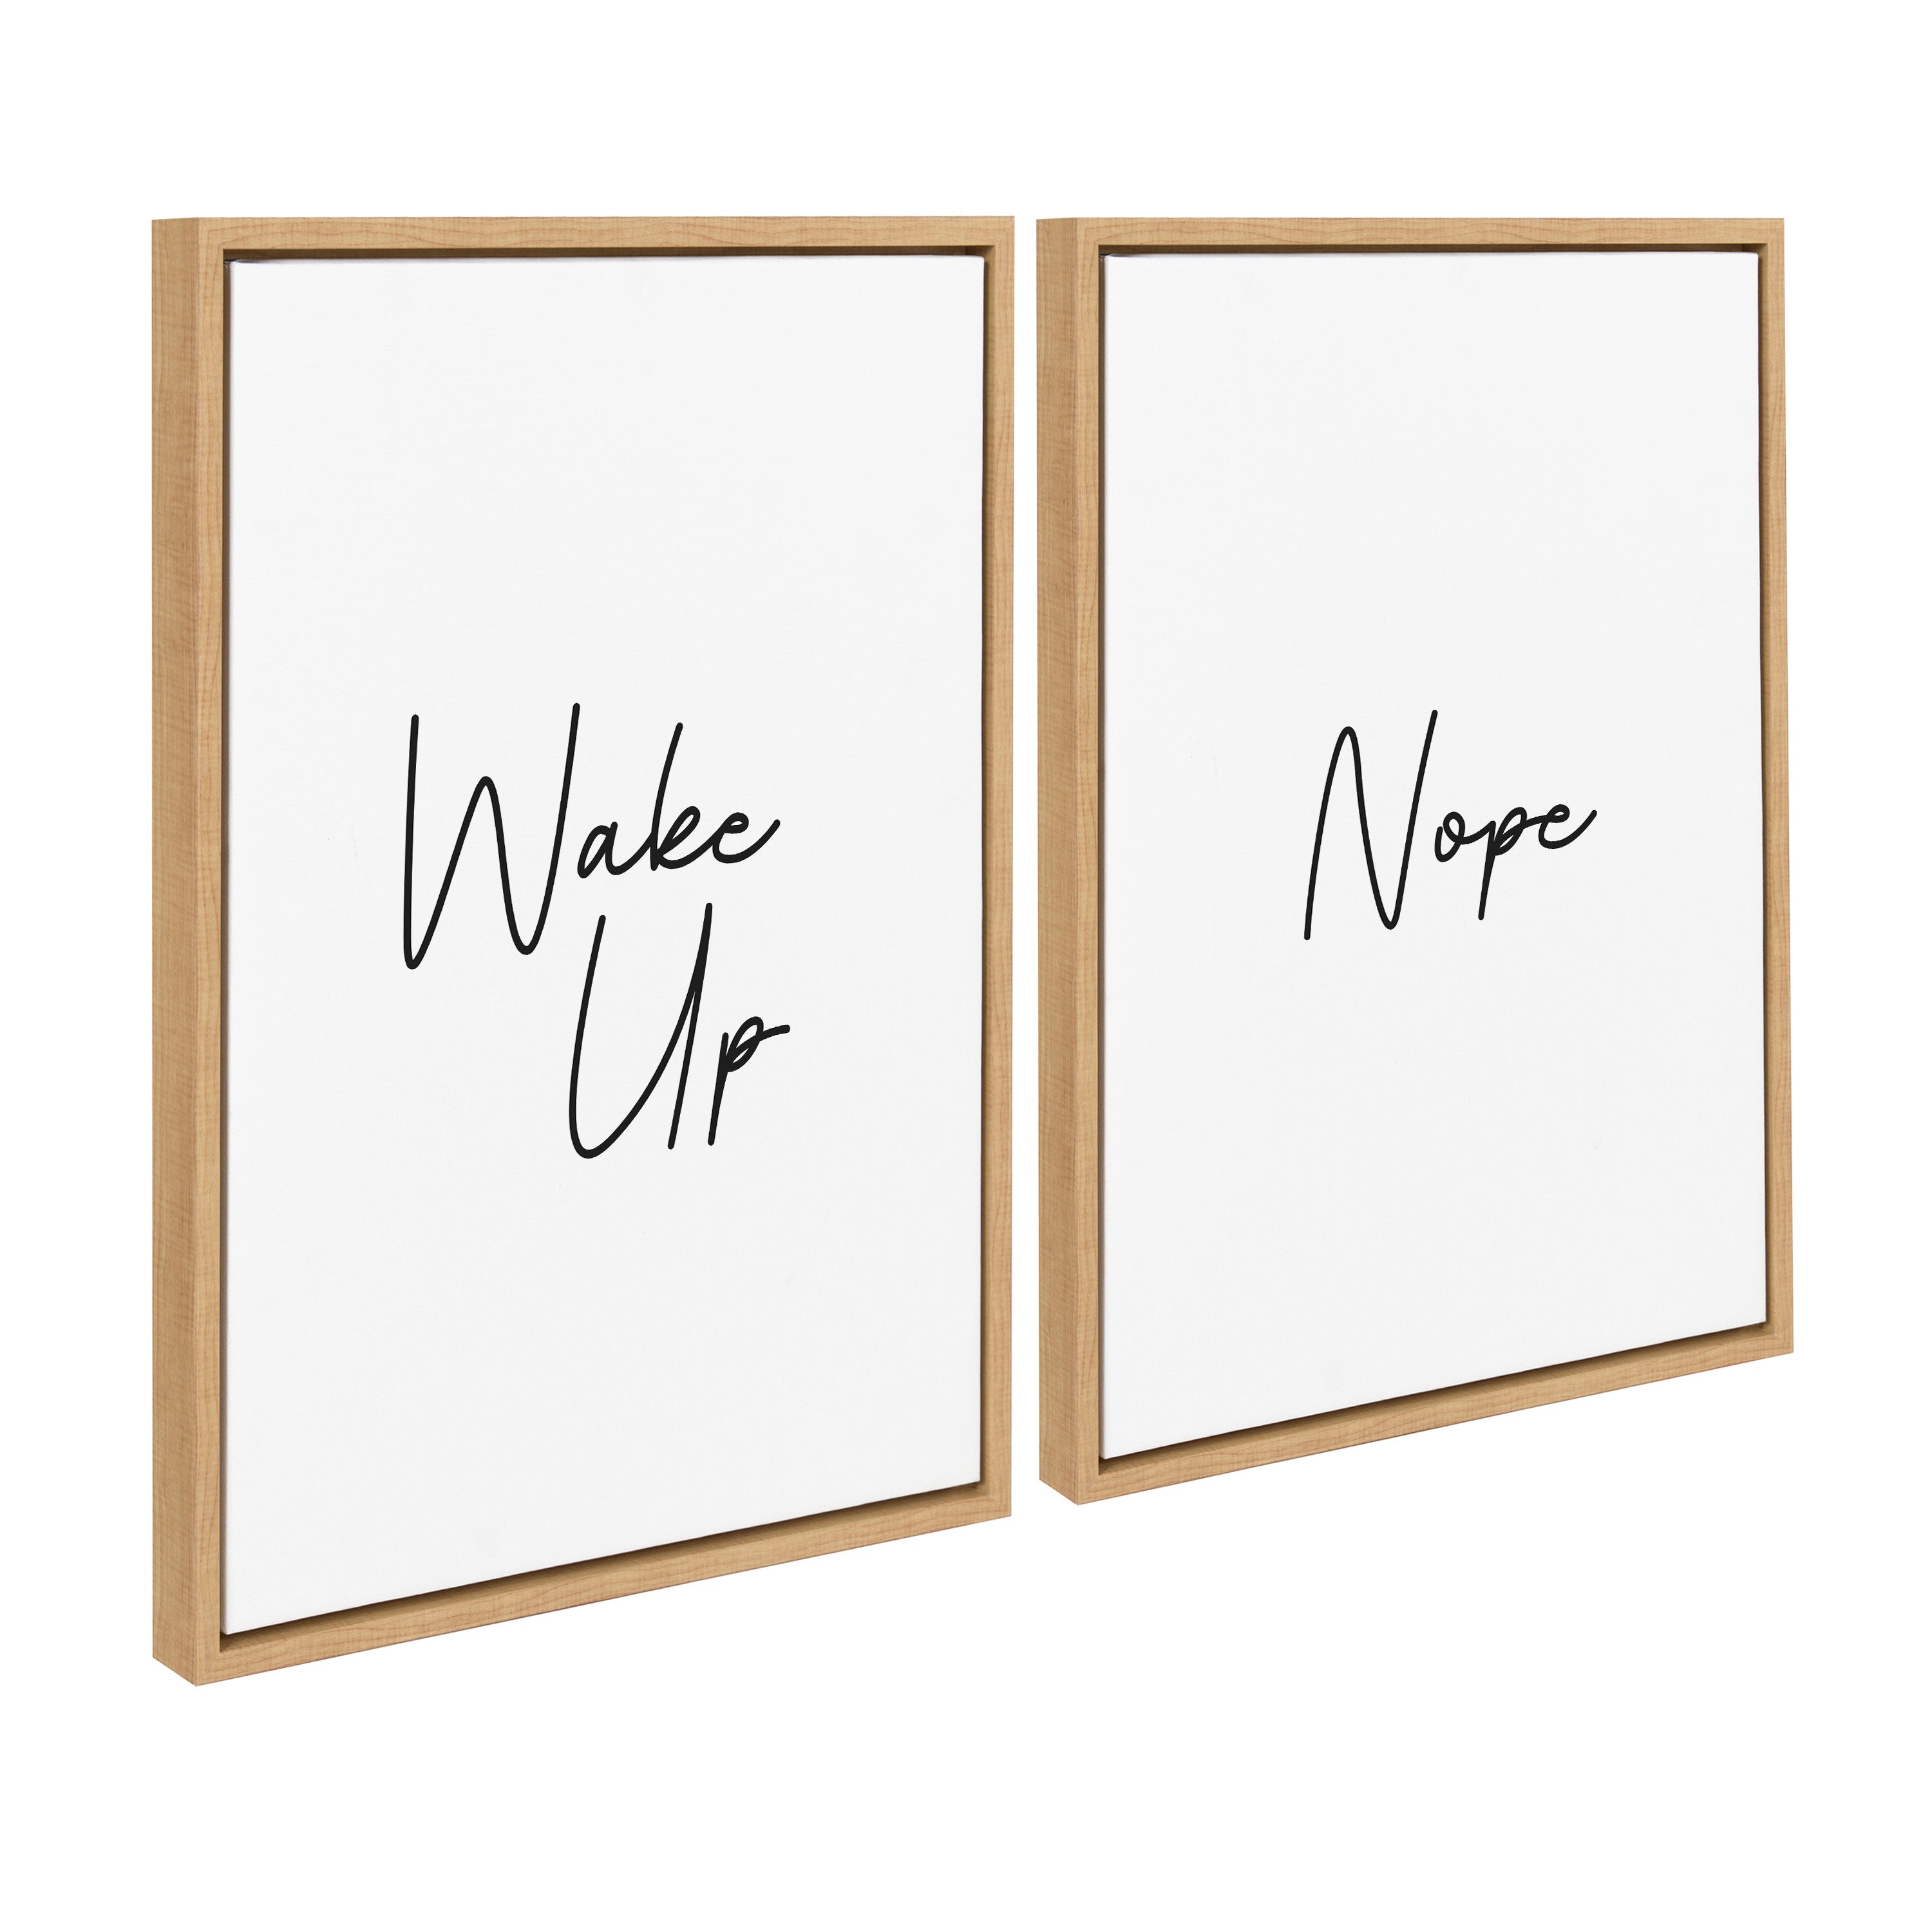 Sylvie Wake Up and Nope Framed Canvas Set by The Creative Bunch Studio